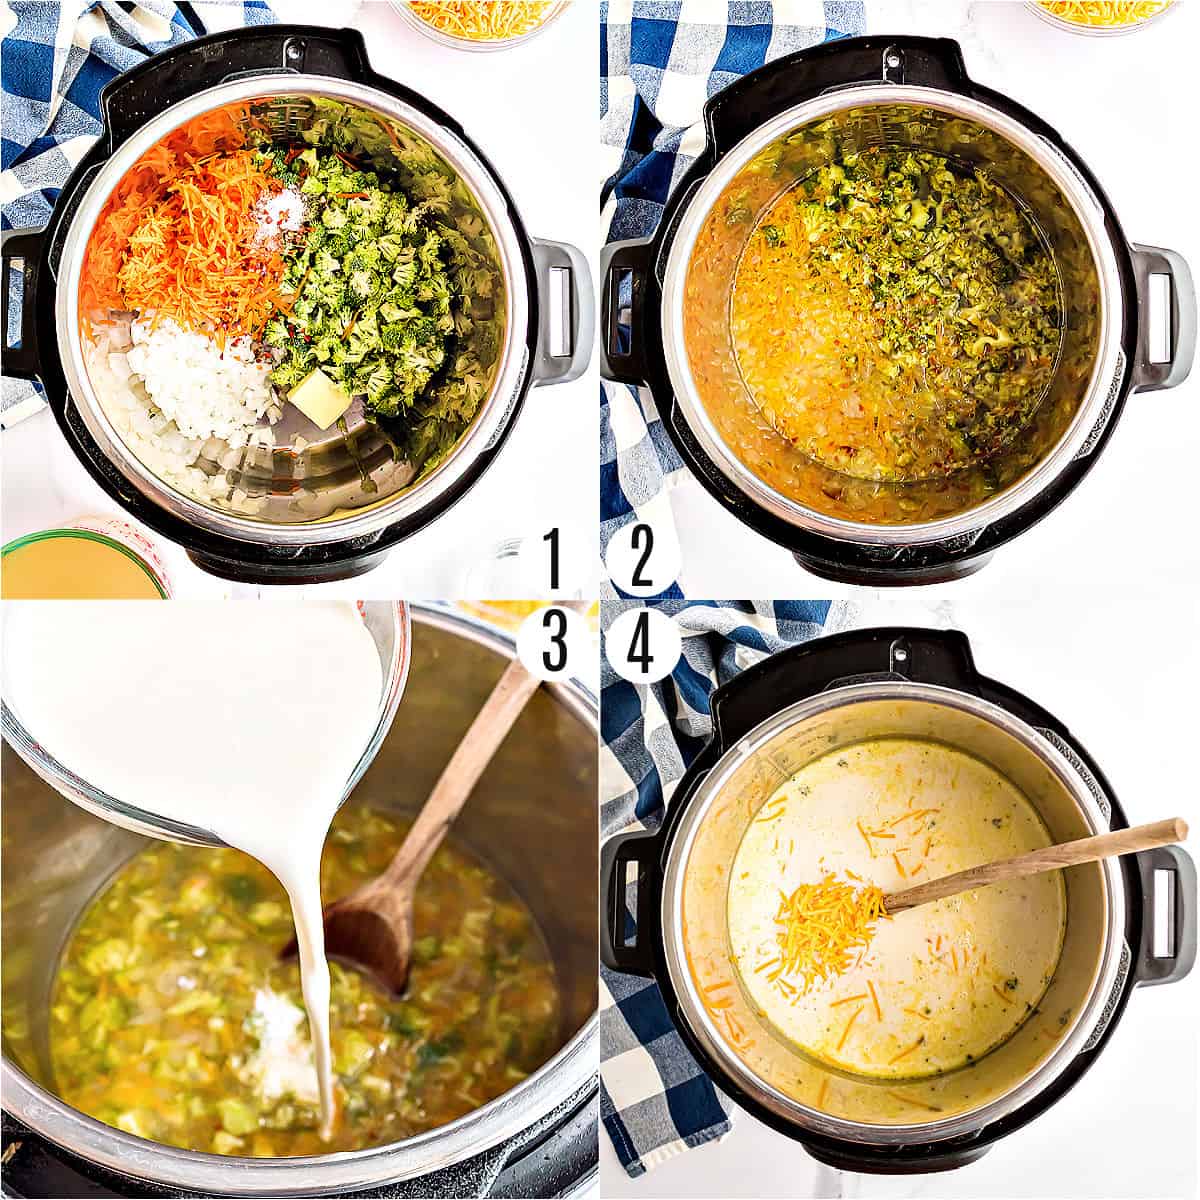 Step by step photos showing how to make broccoli cheese soup.